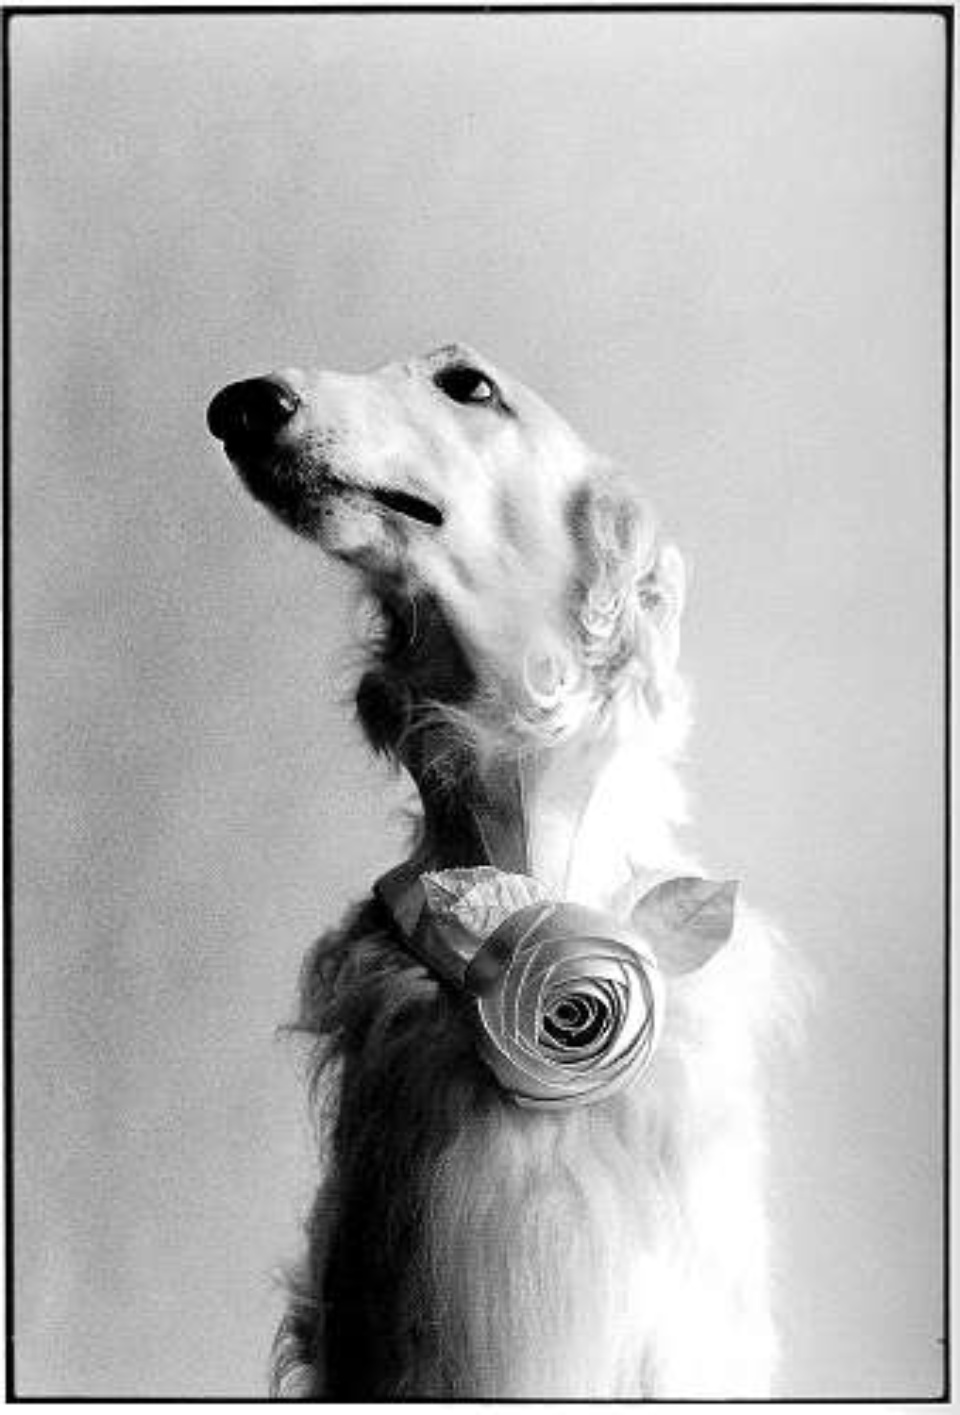 Elliott Erwitt New York City New York, 1999 Gelatin Silver Print Signed, titled and dated on verso Available in different formats